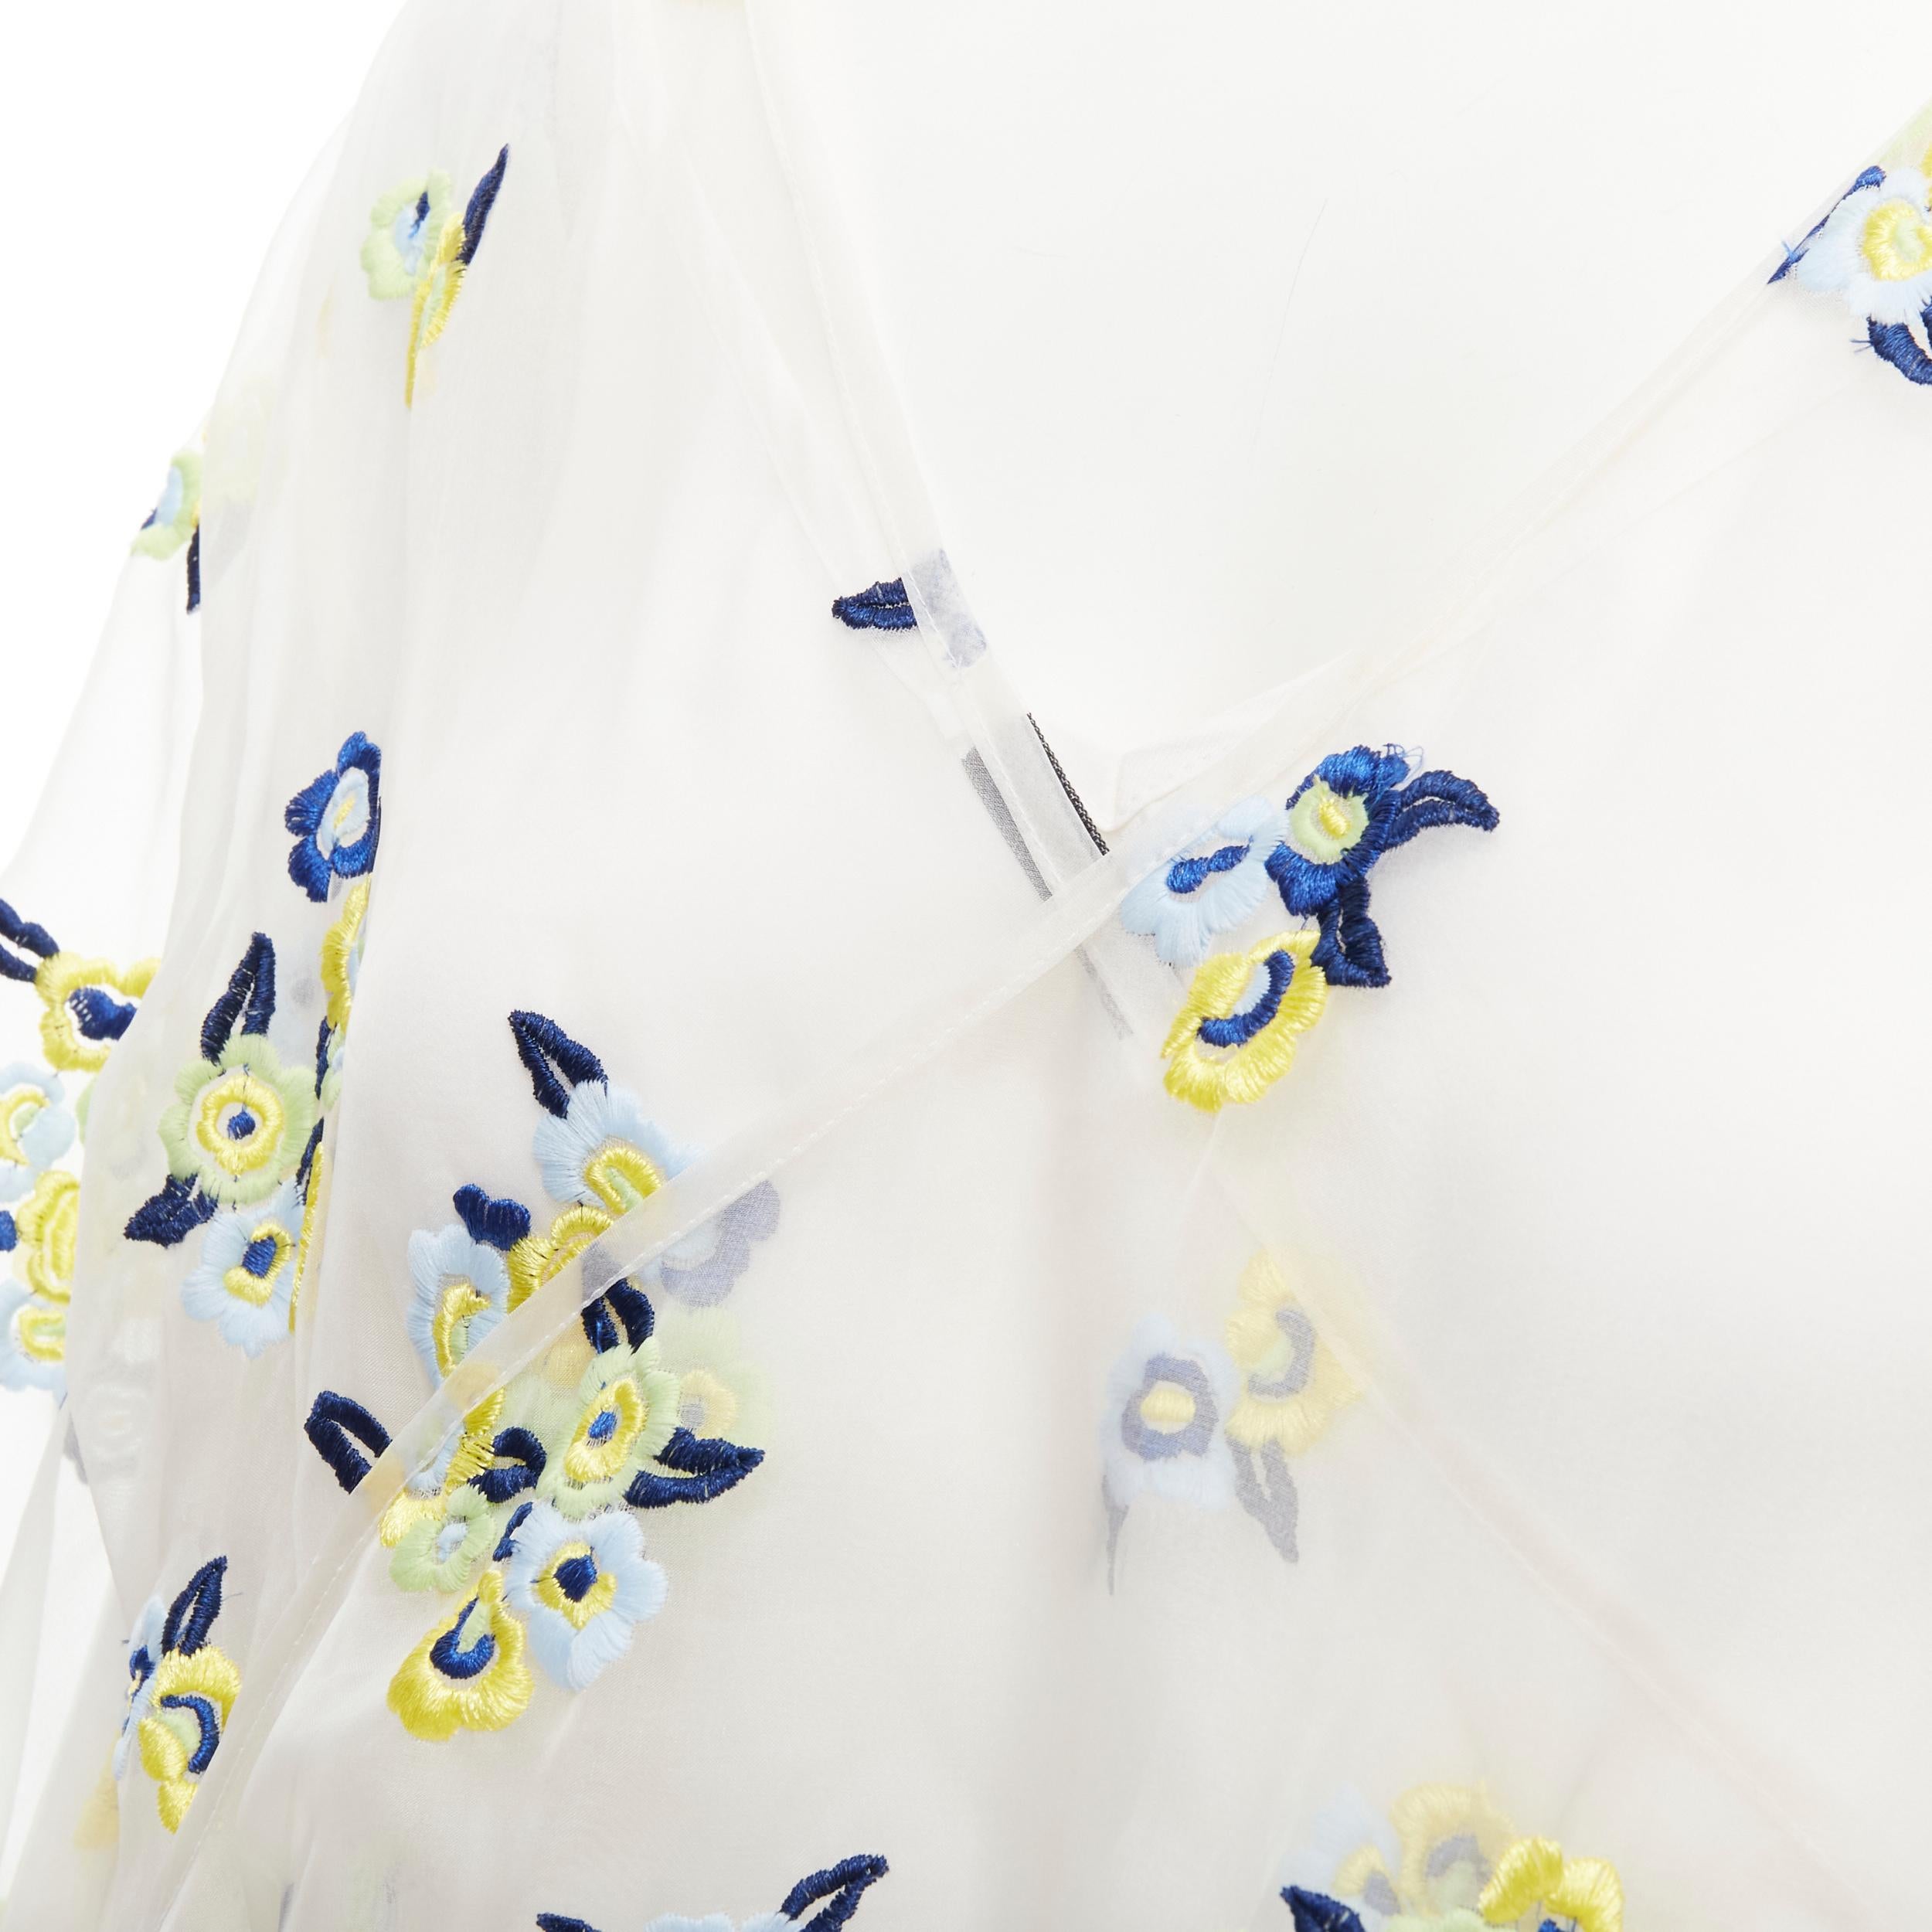 Women's CECILIE BAHNSEN Runway white blue yellow floral embroidery sheer puff dress XS